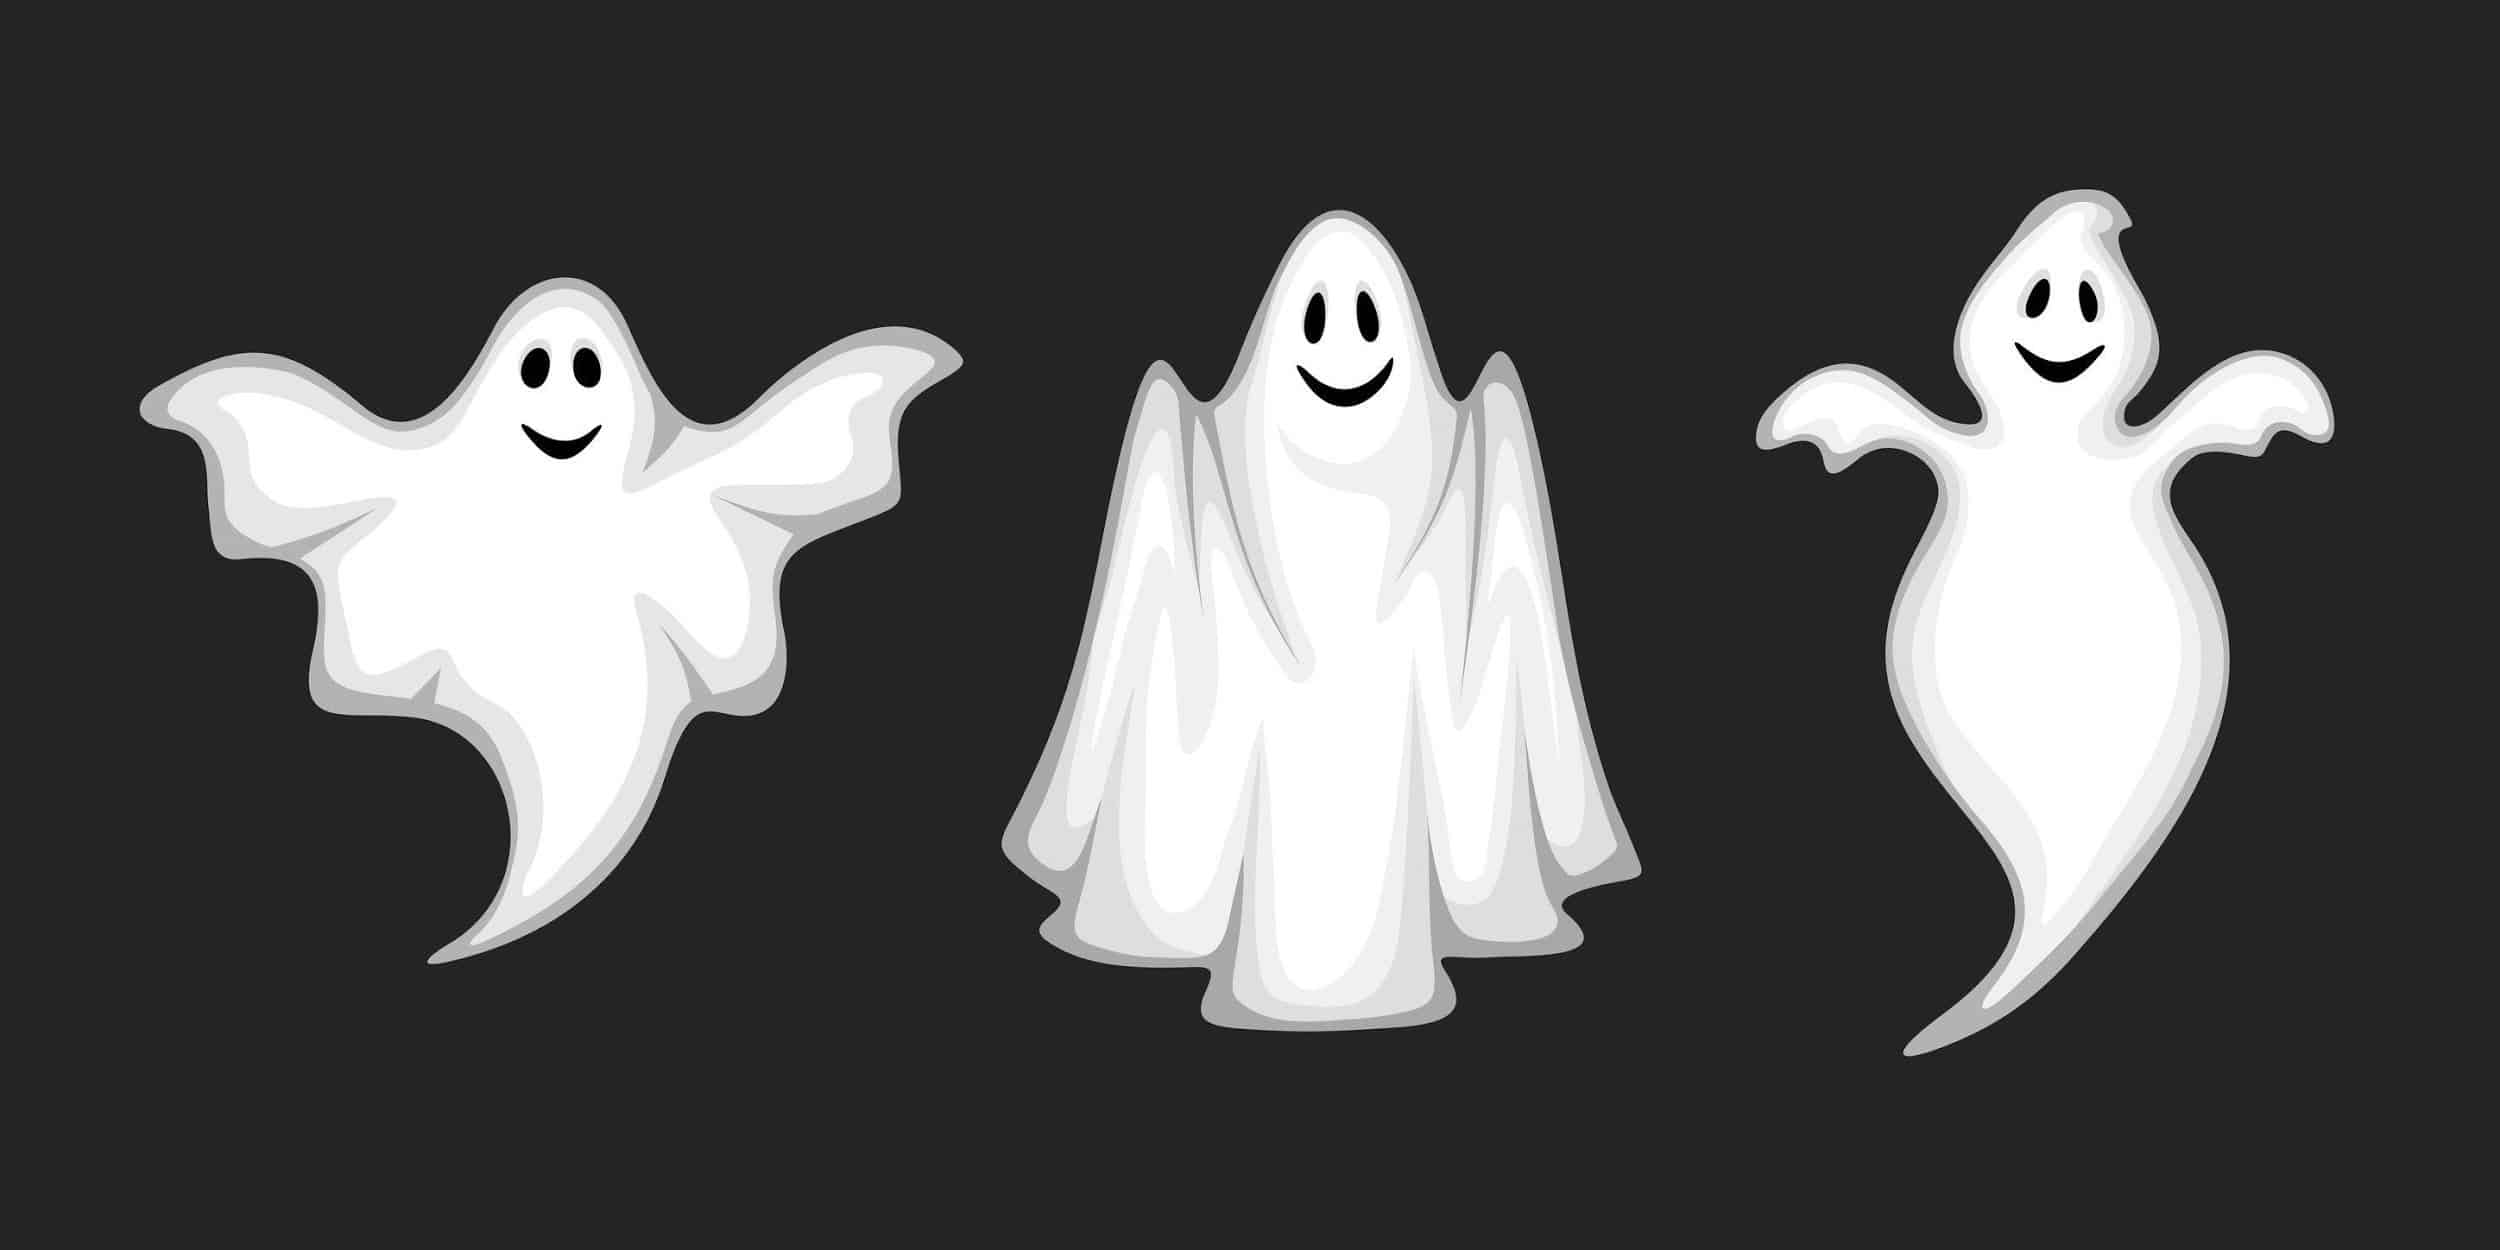 Halloween Special – How Employers Can Avoid Getting Ghosted by Job Candidates